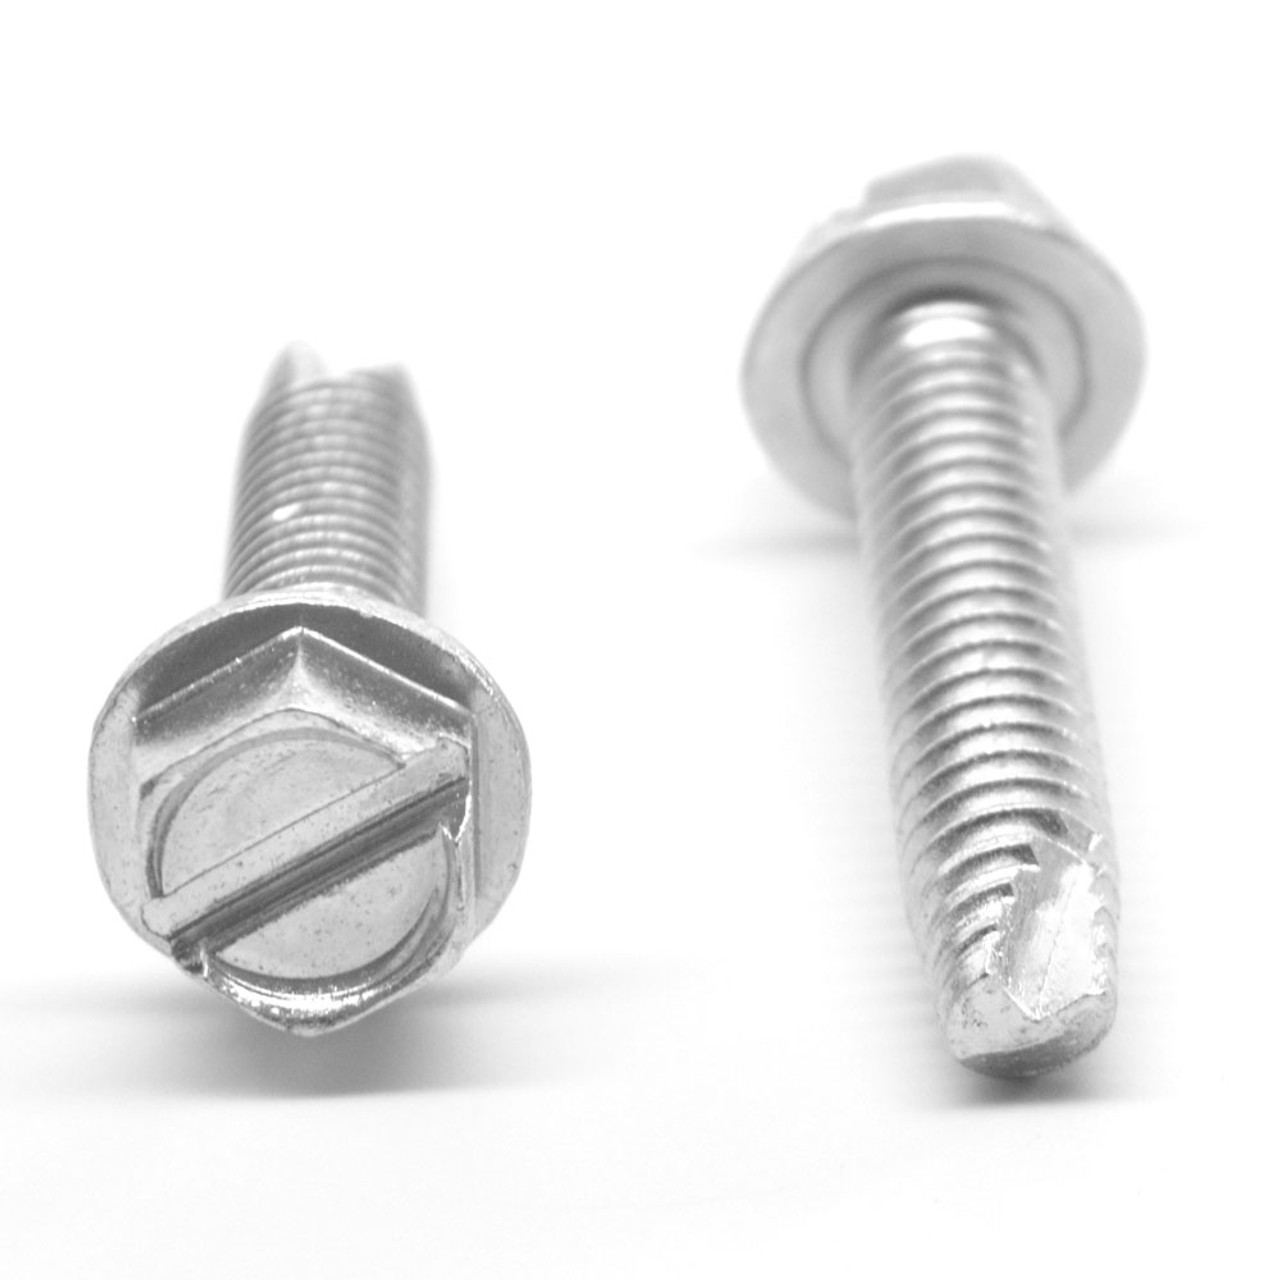 #4-40 x 1/4" (FT) Coarse Thread Thread Cutting Screw Slotted Hex Washer Head Type 23 Low Carbon Steel Zinc Plated